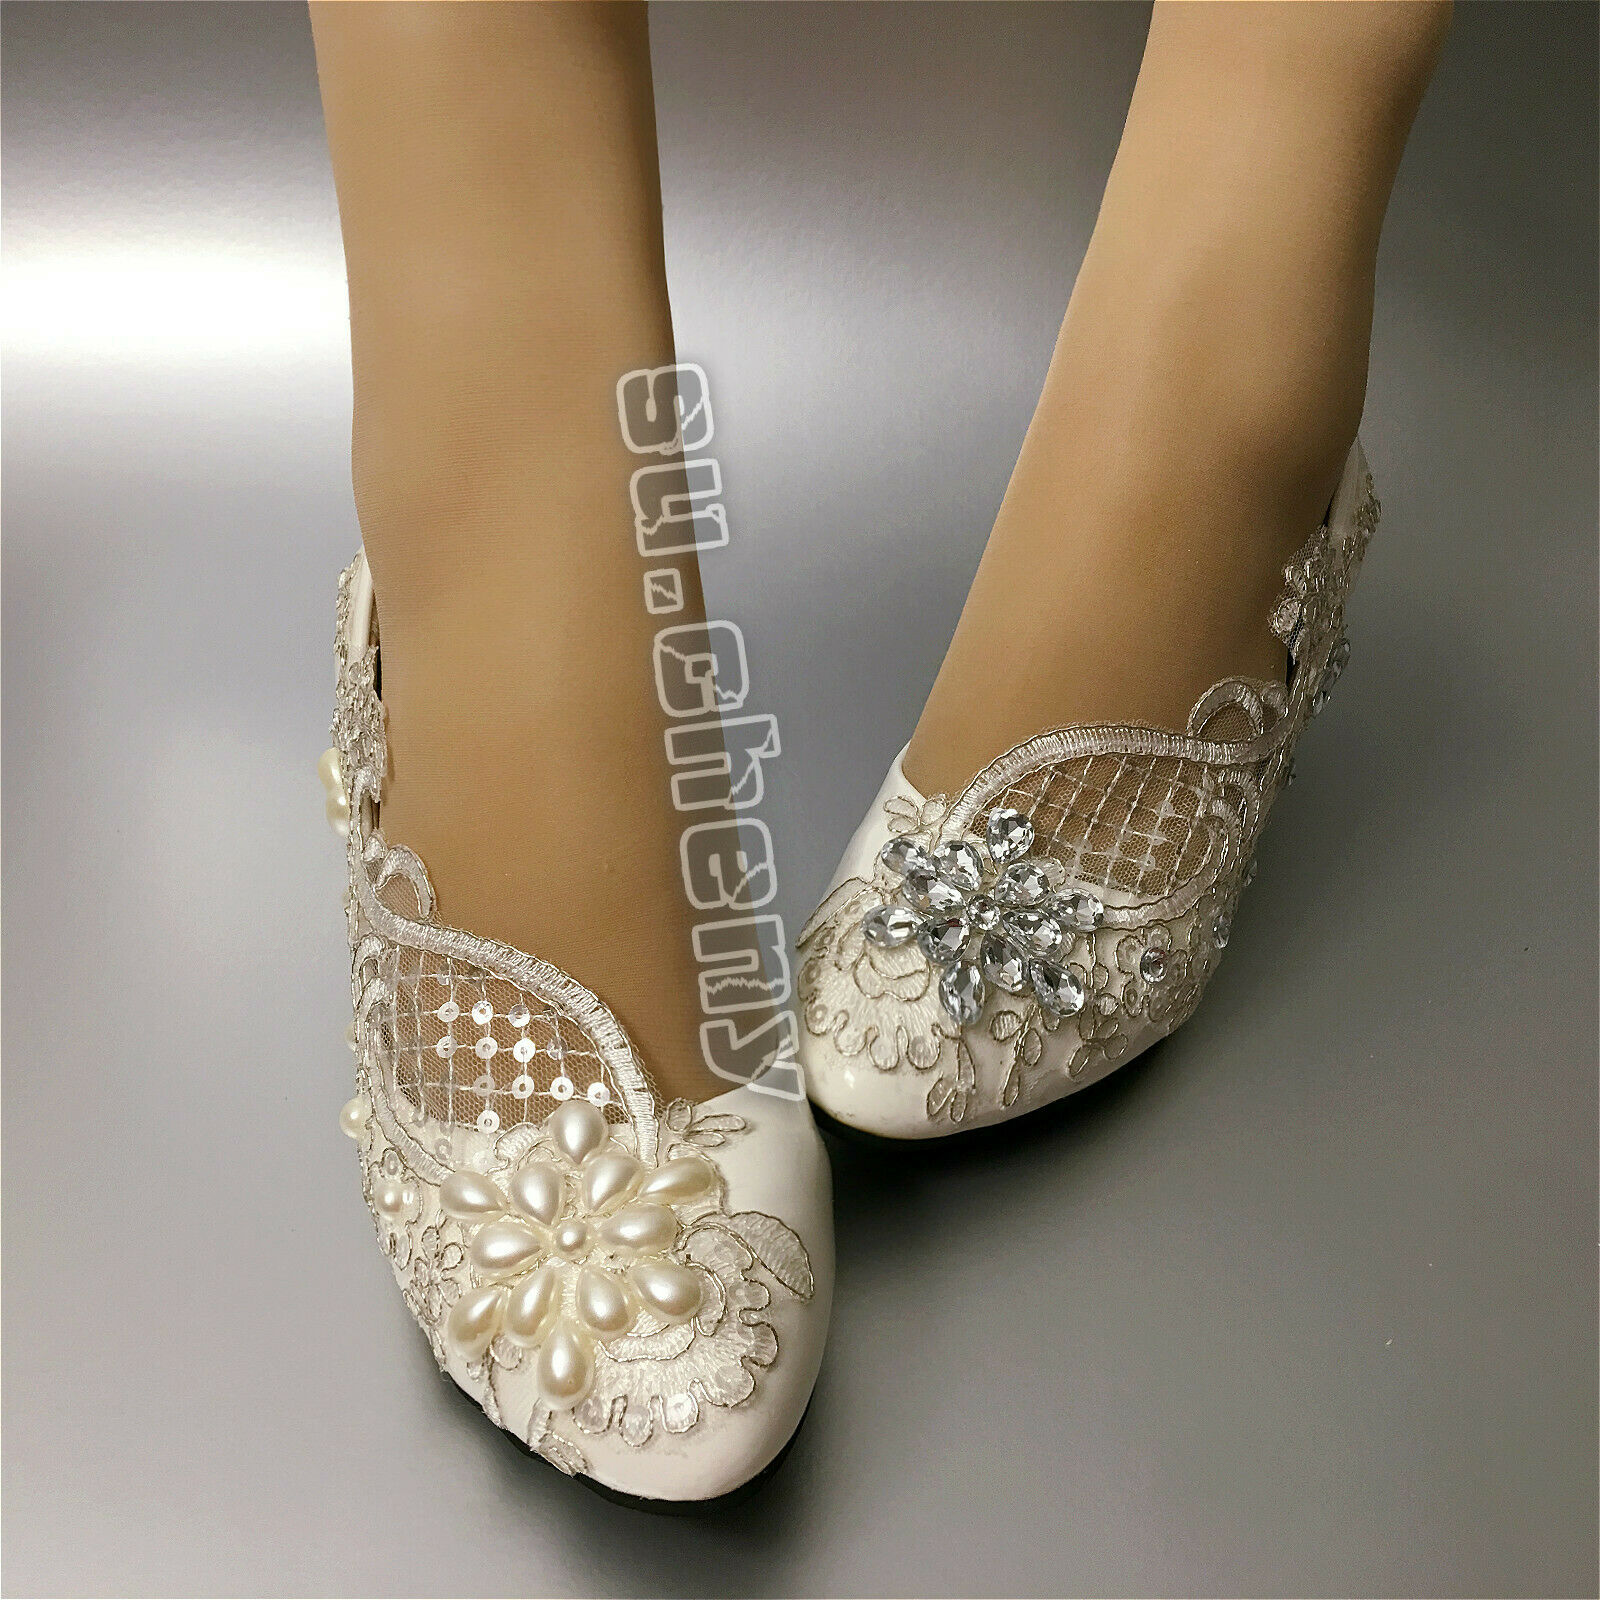 Su.cheny- Lace White Ivory Crystal Flats Low High Heel Pump Wedding Bridal Shoes